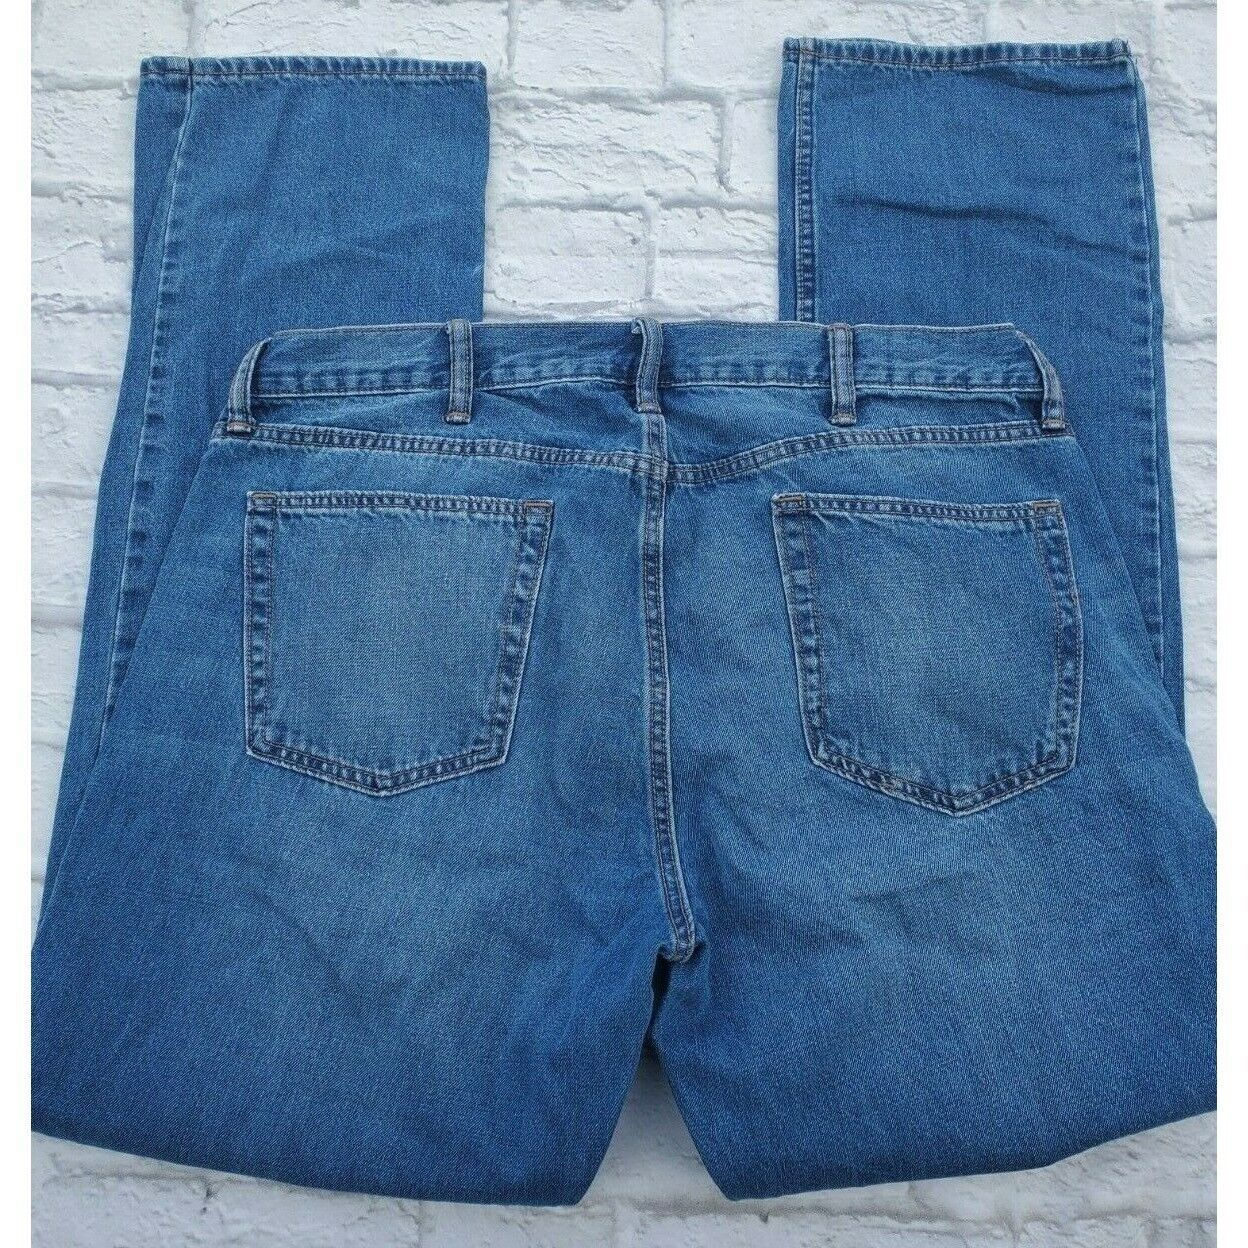 Primary image for Old Navy Jeans Mens 38x34 Medium Wash High Rise Cotton Famous Slim Leg Denim